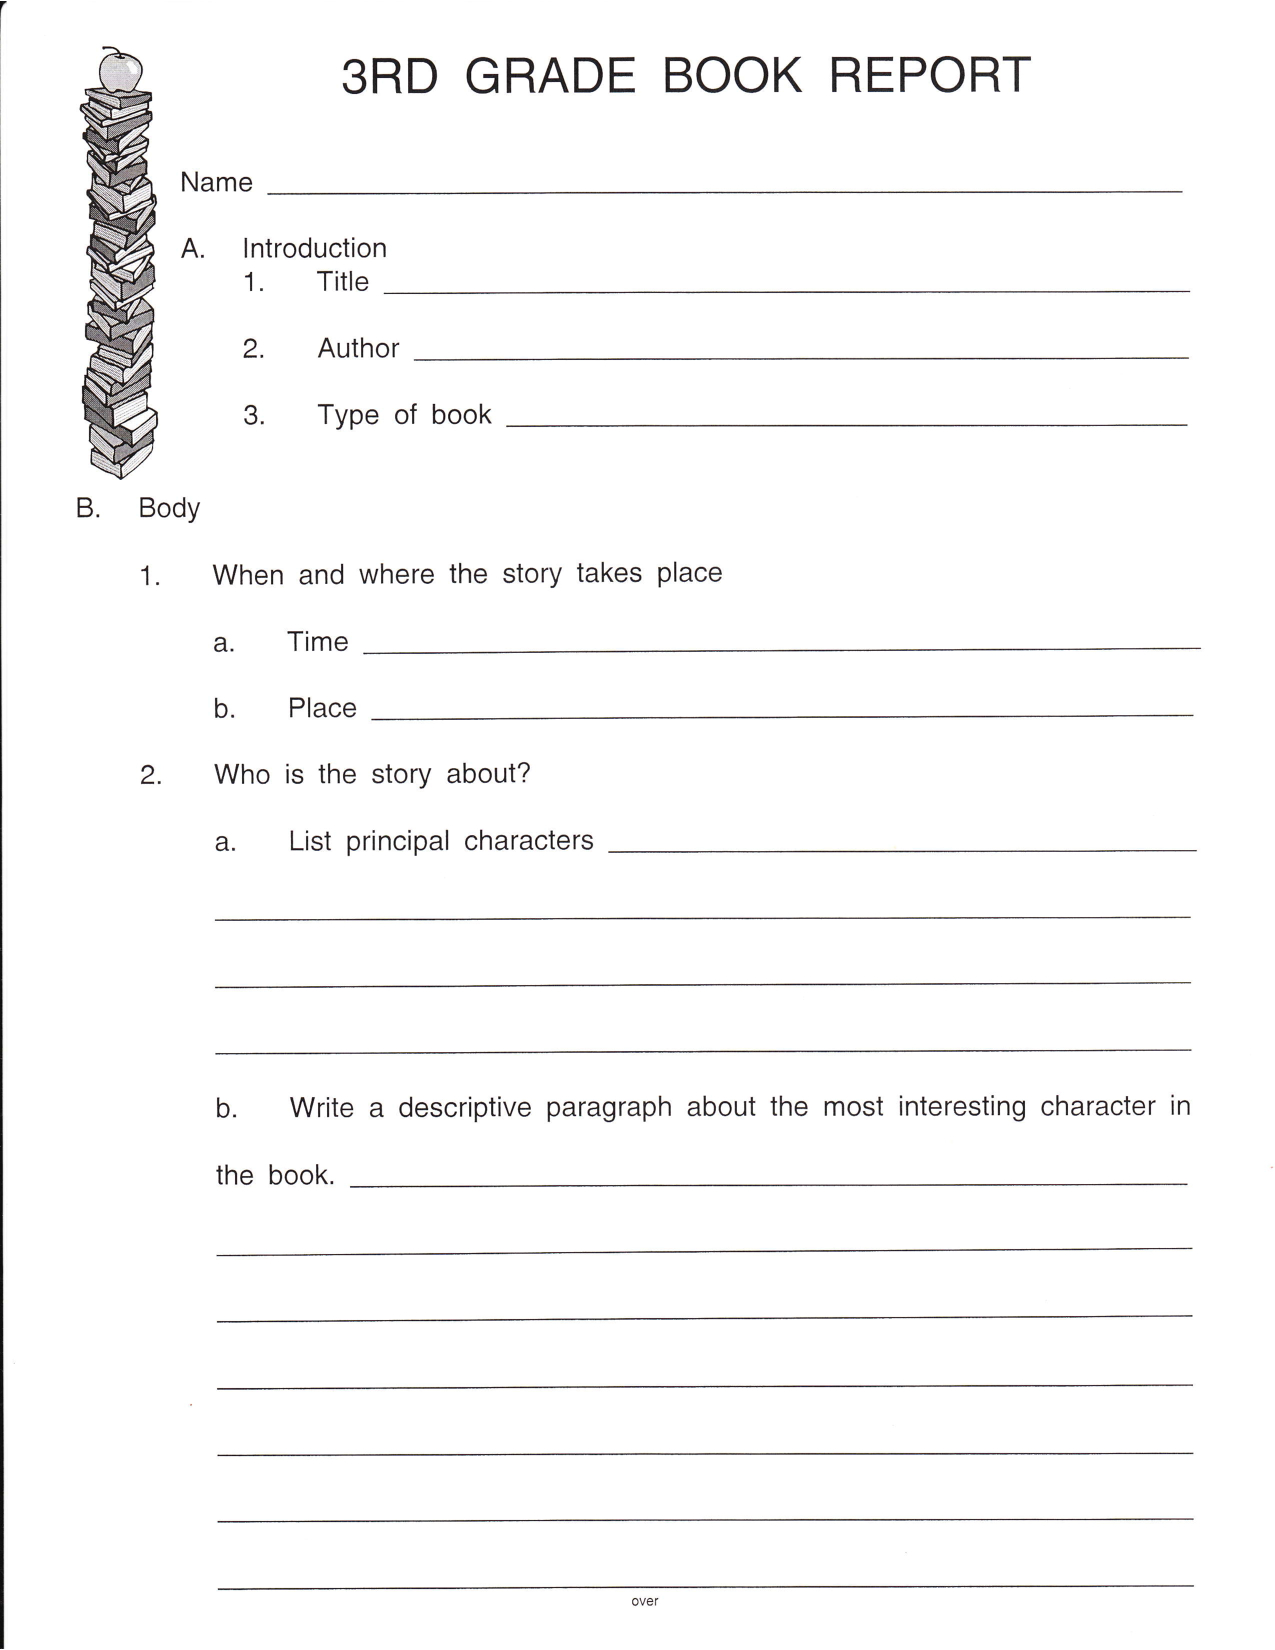 Worksheet Ideas ~ 1St Grade Reading Worksheets Freee Fall For First Grade Book Report Template